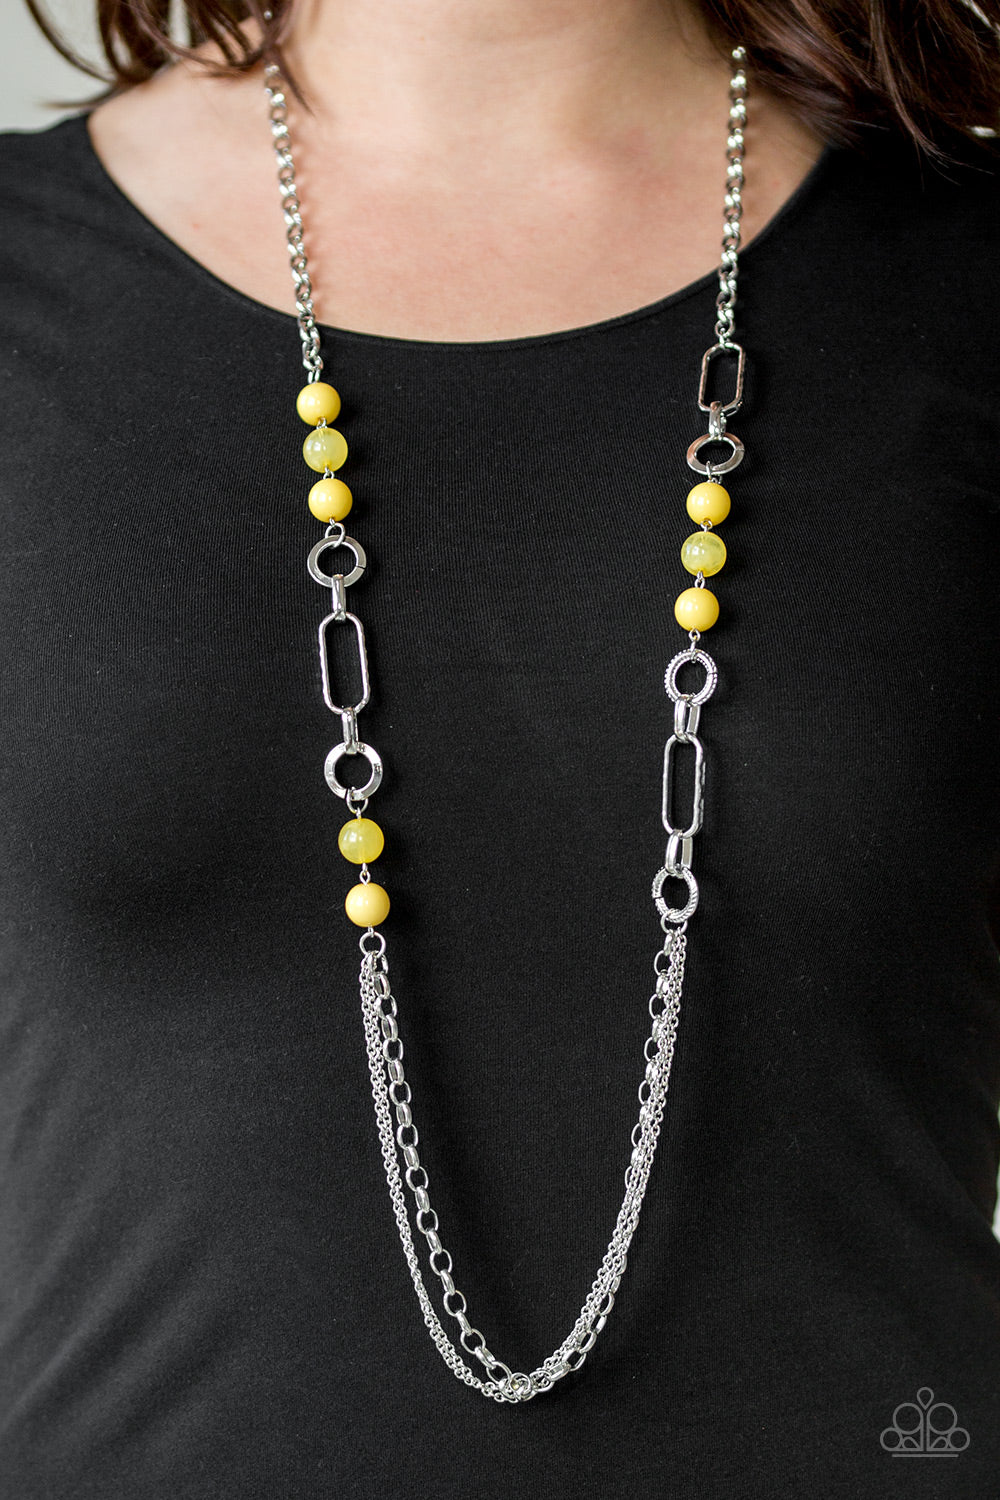 CACHE Me Out Yellow Necklace - Paparazzi Accessories  A collection of glassy and polished yellow beads give way to layers of mismatched silver chain for a whimsical look. Features an adjustable clasp closure.   All Paparazzi Accessories are lead free and nickel free!  Sold as one individual necklace. Includes one pair of matching earrings.